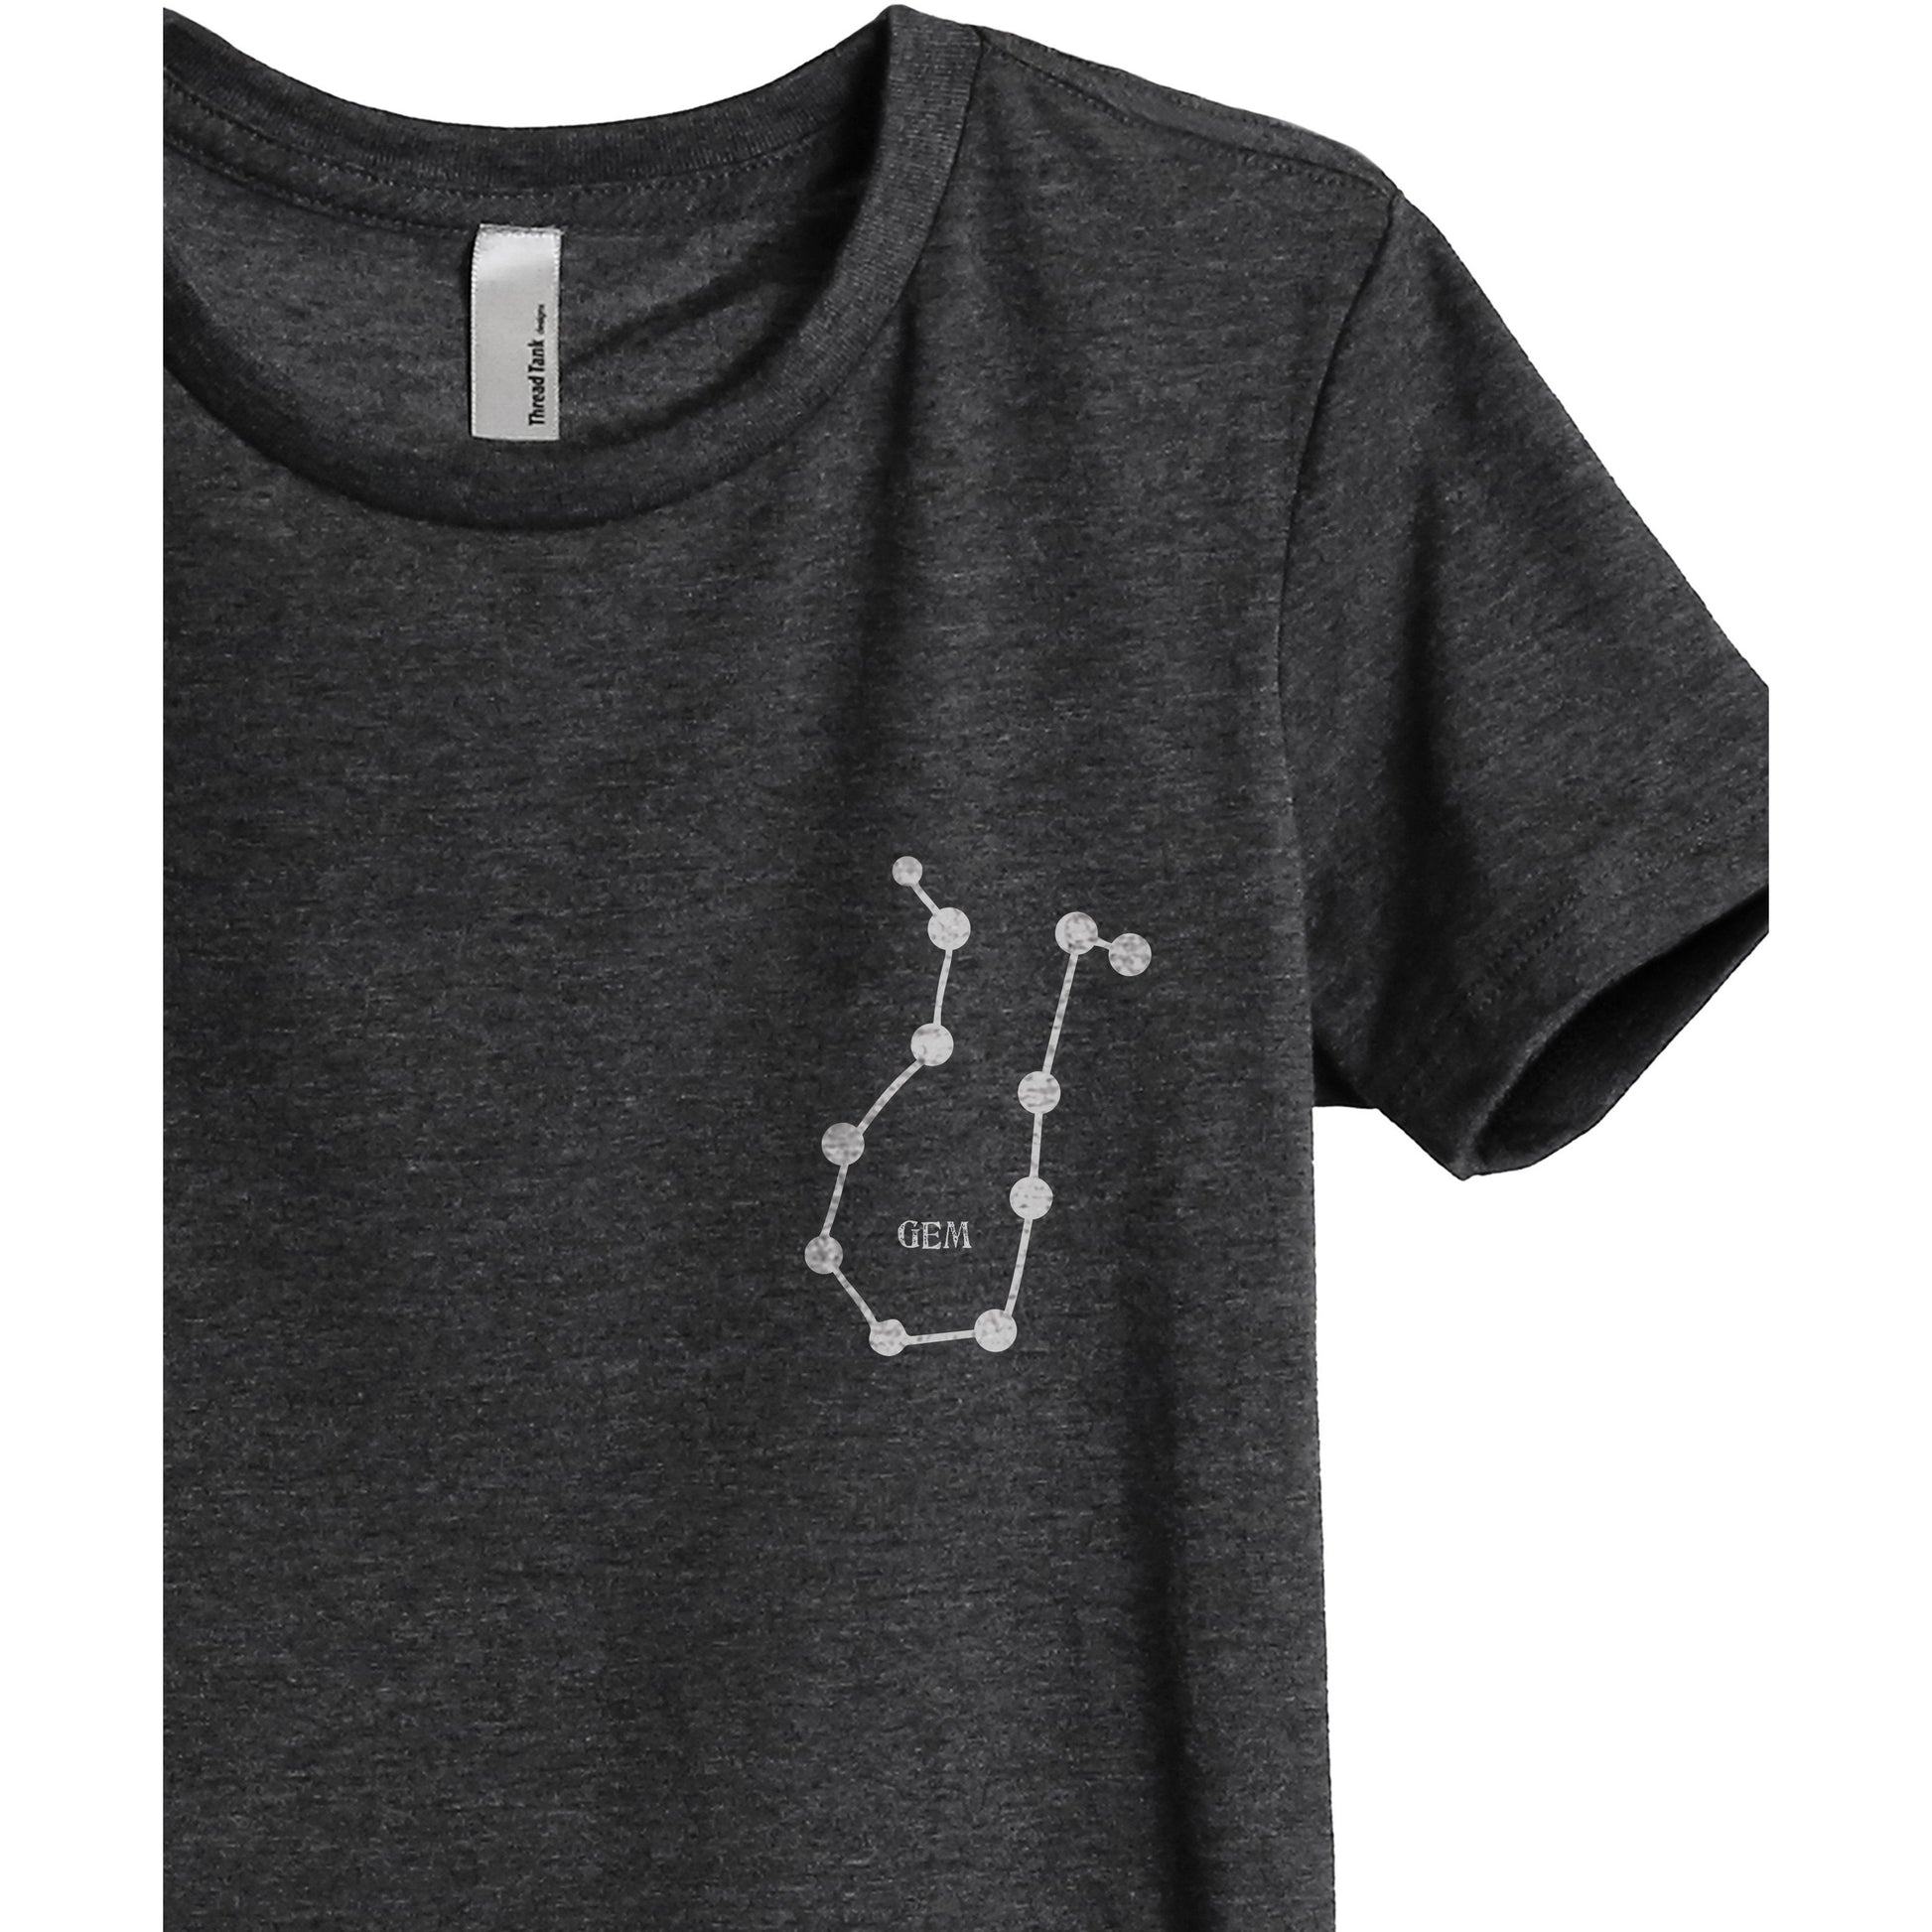 Gemini GEM Constellation Astrology Women's Relaxed Crewneck T-Shirt Top Tee Charcoal Grey Zoom Details